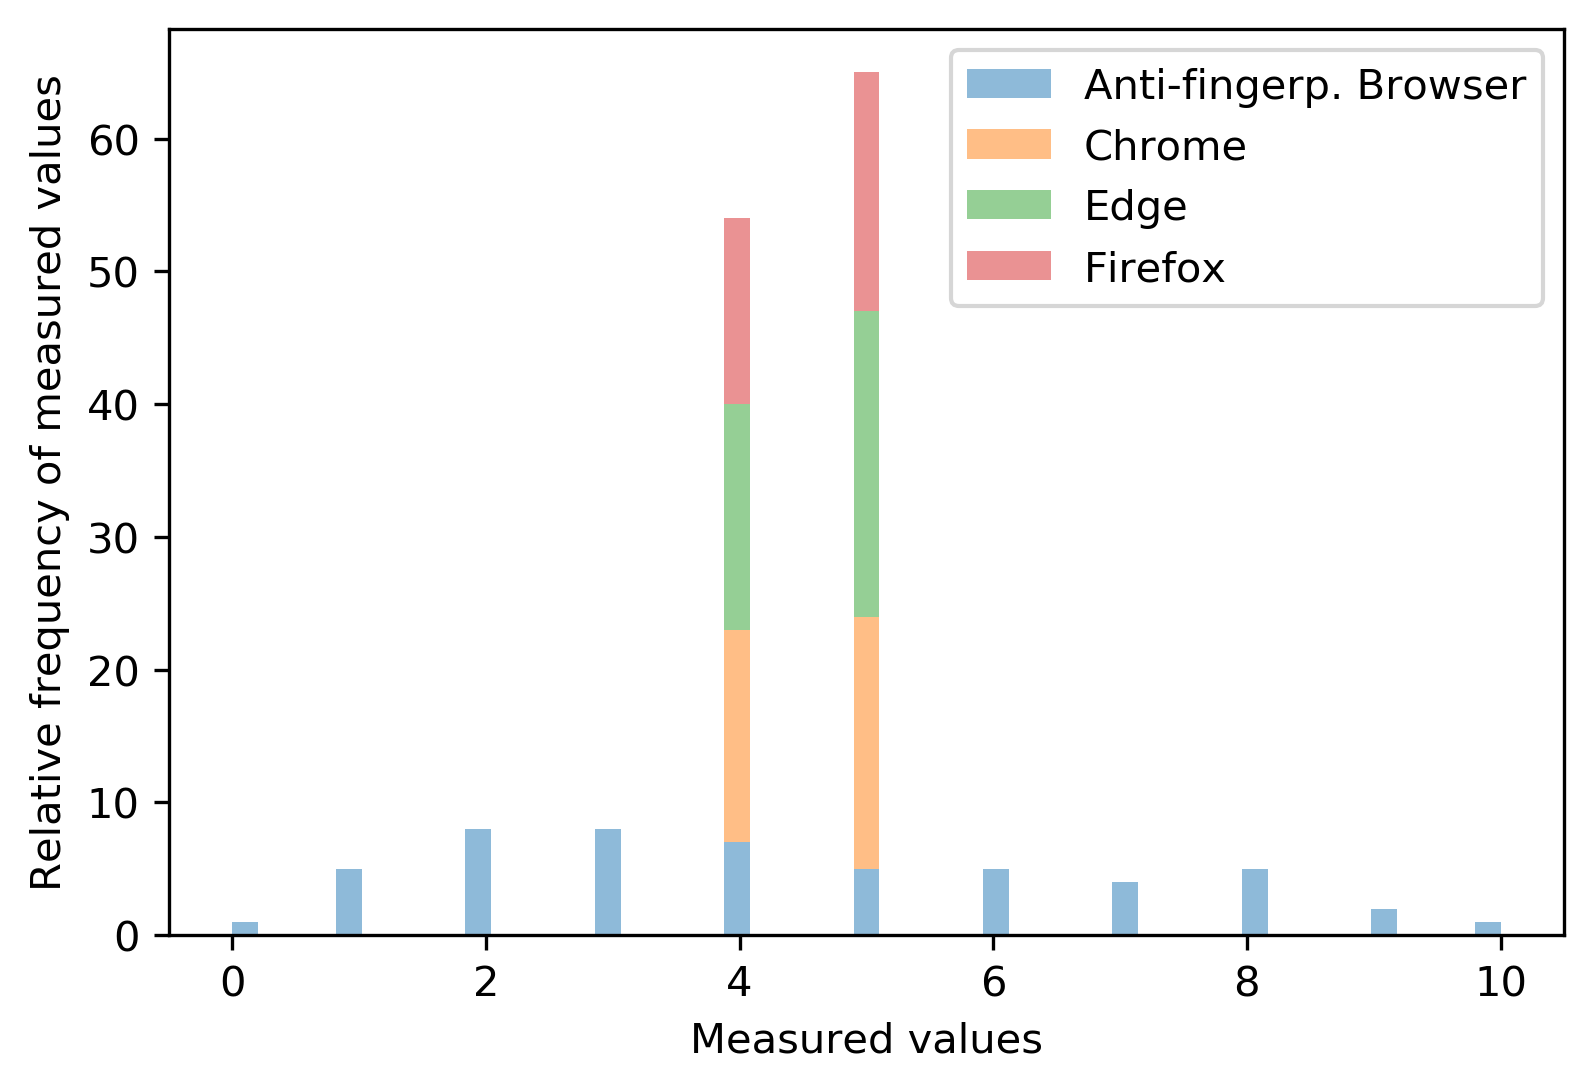 Standard browsers gave a score of 4 or 5 but anti-fingerprinting browser tends to distribute them between 0 - 10.